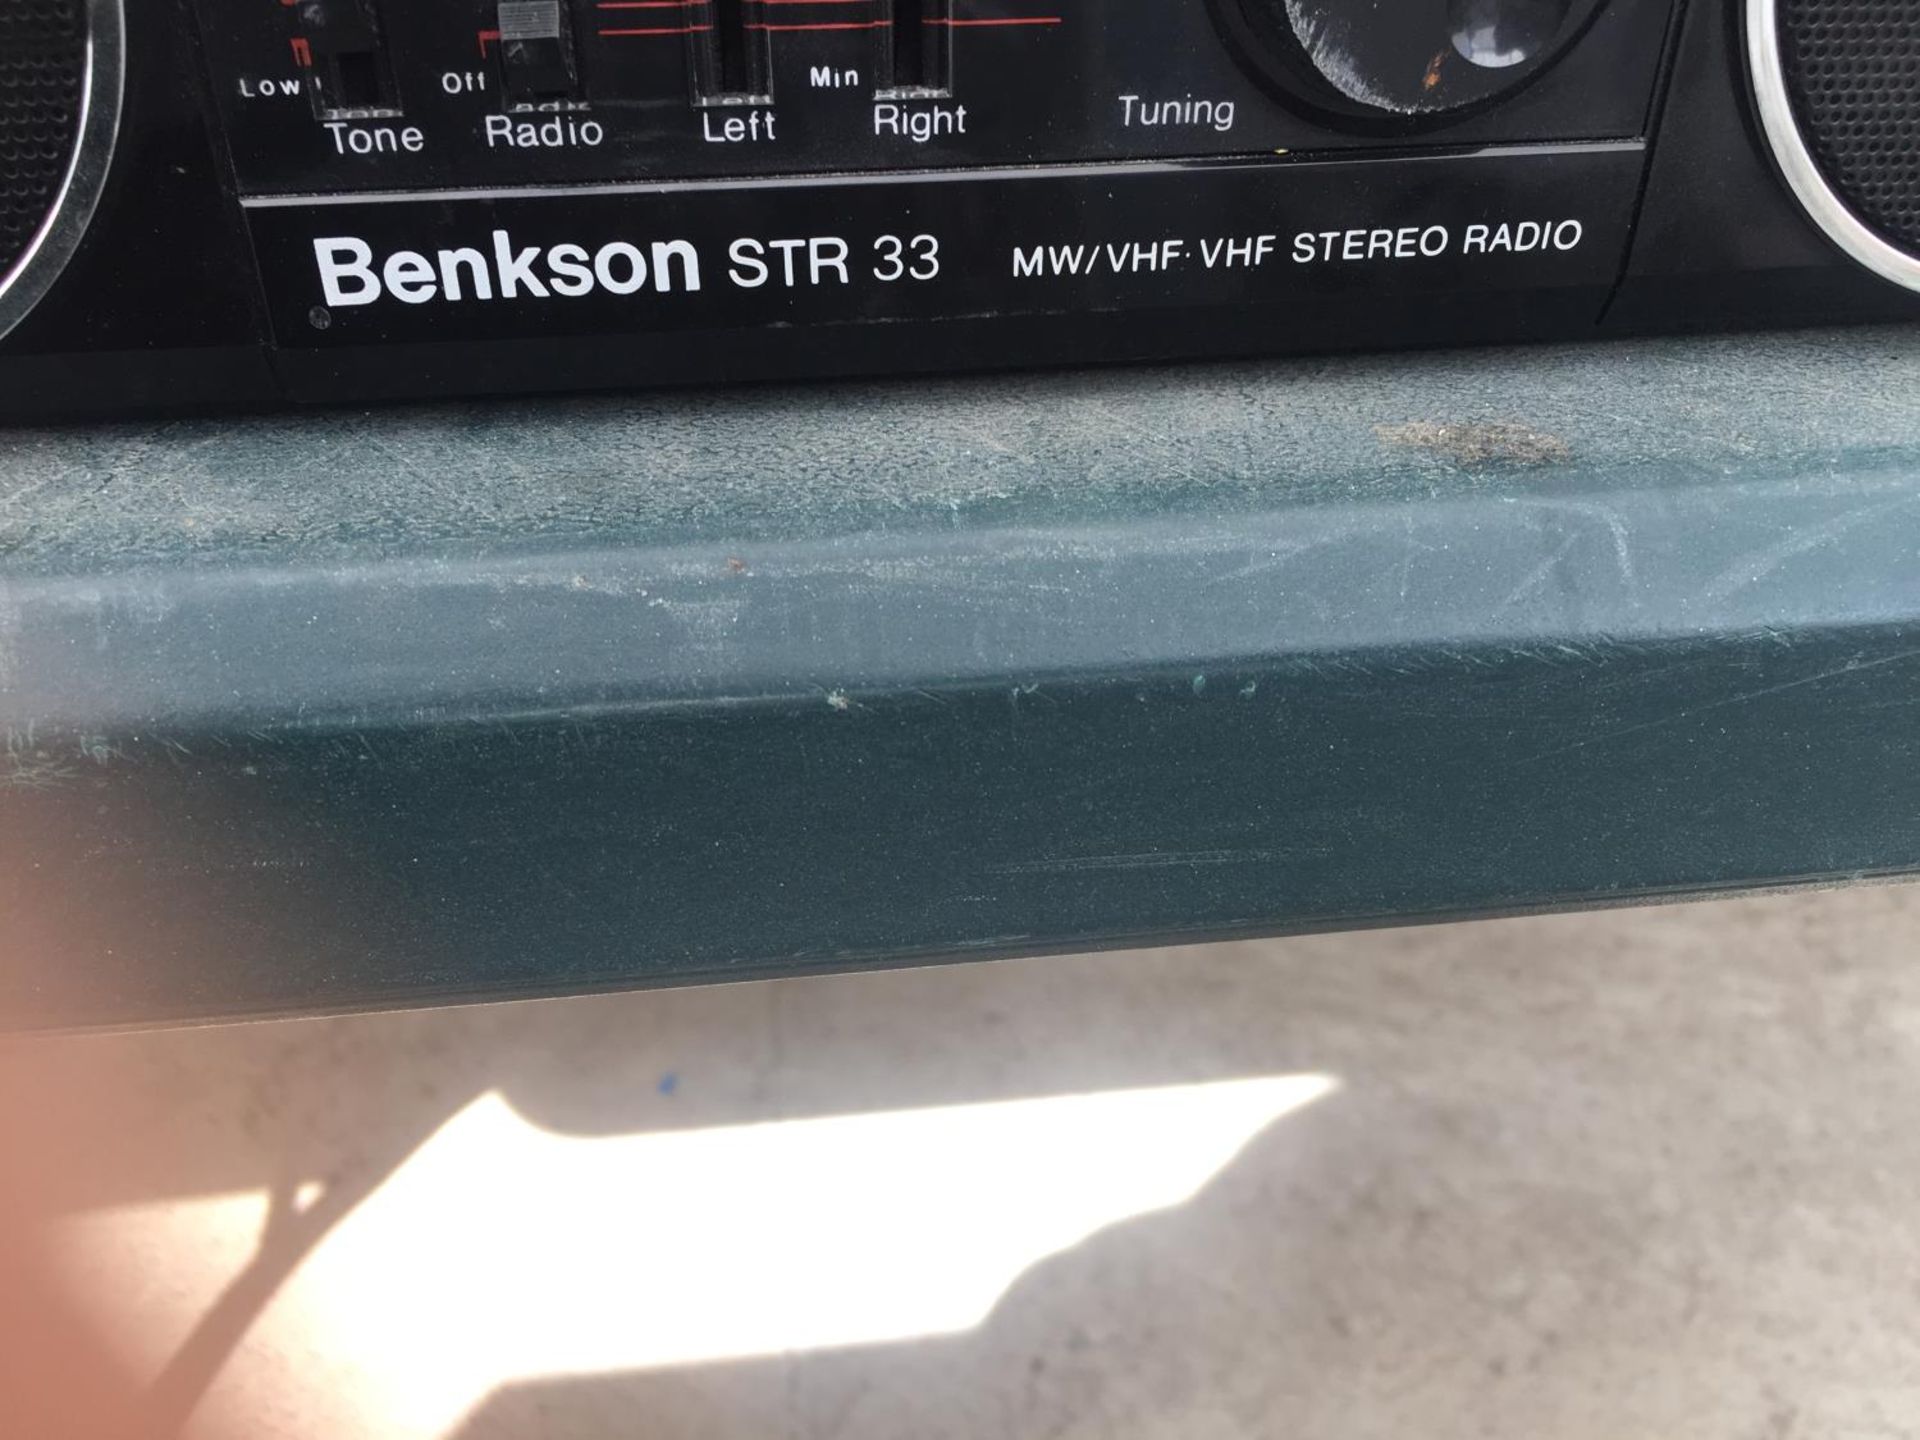 AN ASSORTMENT OF RADIOS TO INCLUDE BENKSON STR 33, A PROLINE AND A SHARP - Image 2 of 5